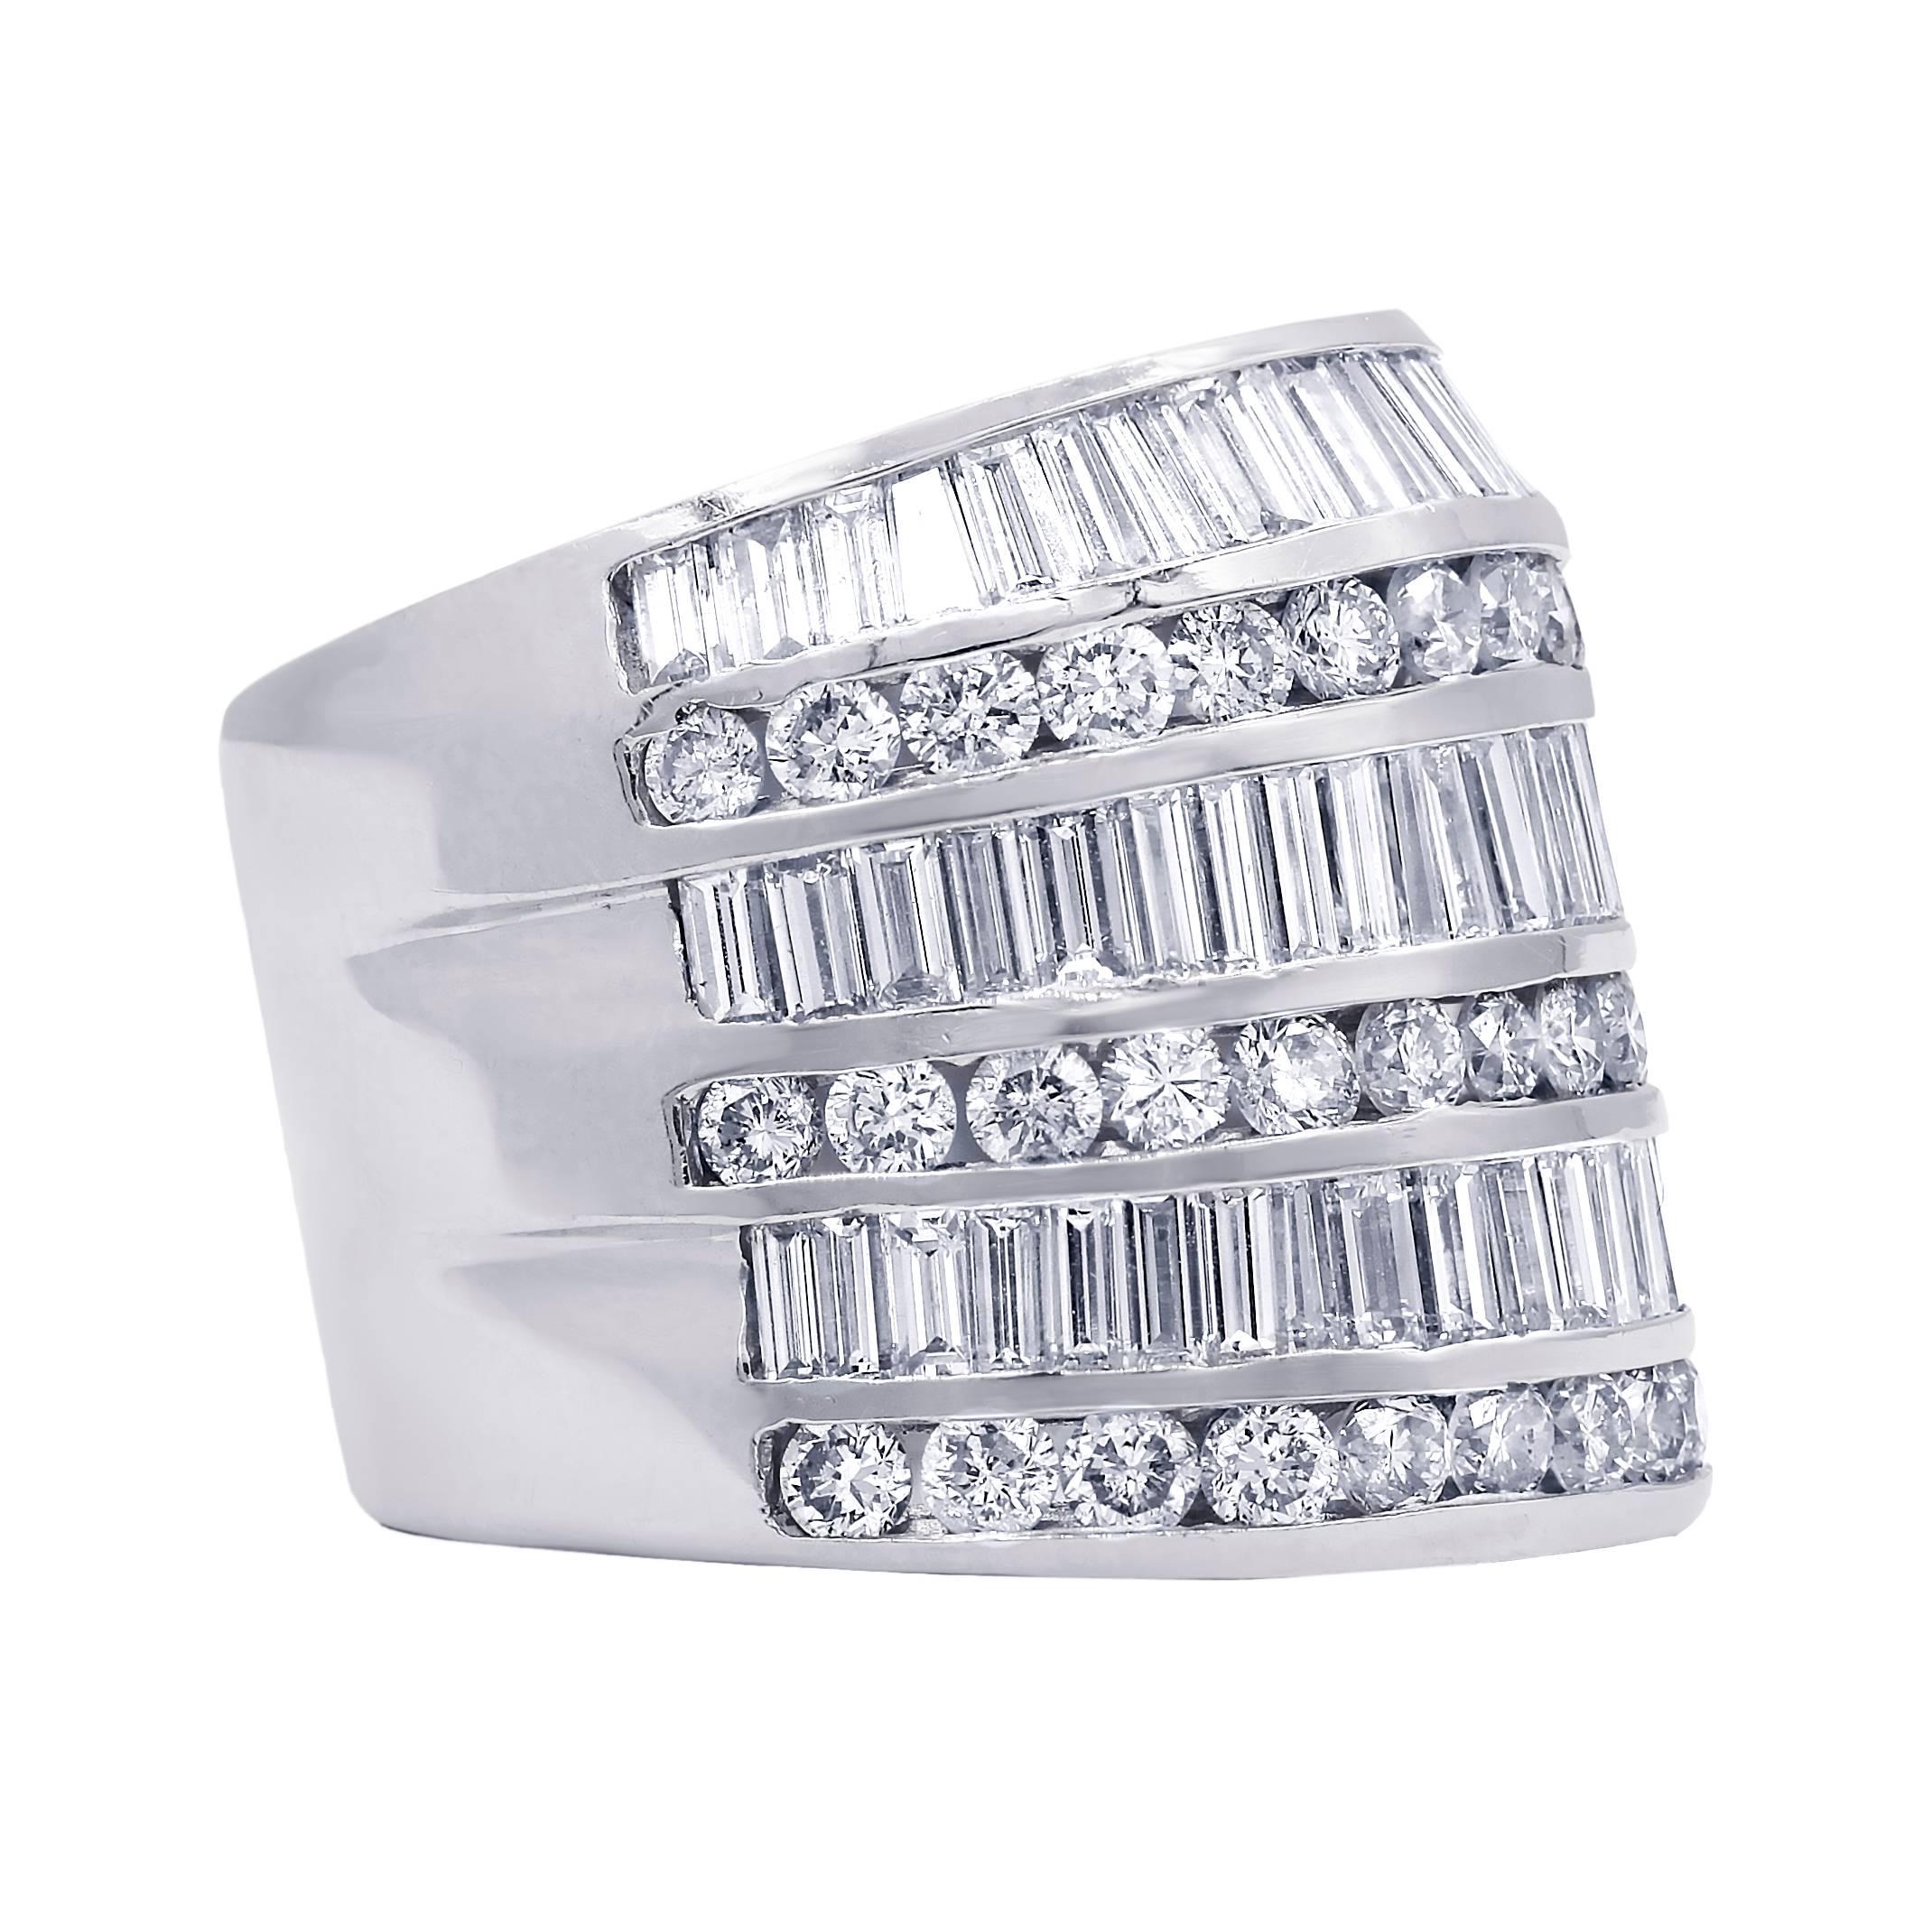 18 kt white gold diamond fashion ring adorned with alternating rows of 6.00 cts tw baguette cut and round diamonds going half way around
Diana M. is a leading supplier of top-quality fine jewelry for over 35 years.
Diana M is one-stop shop for all